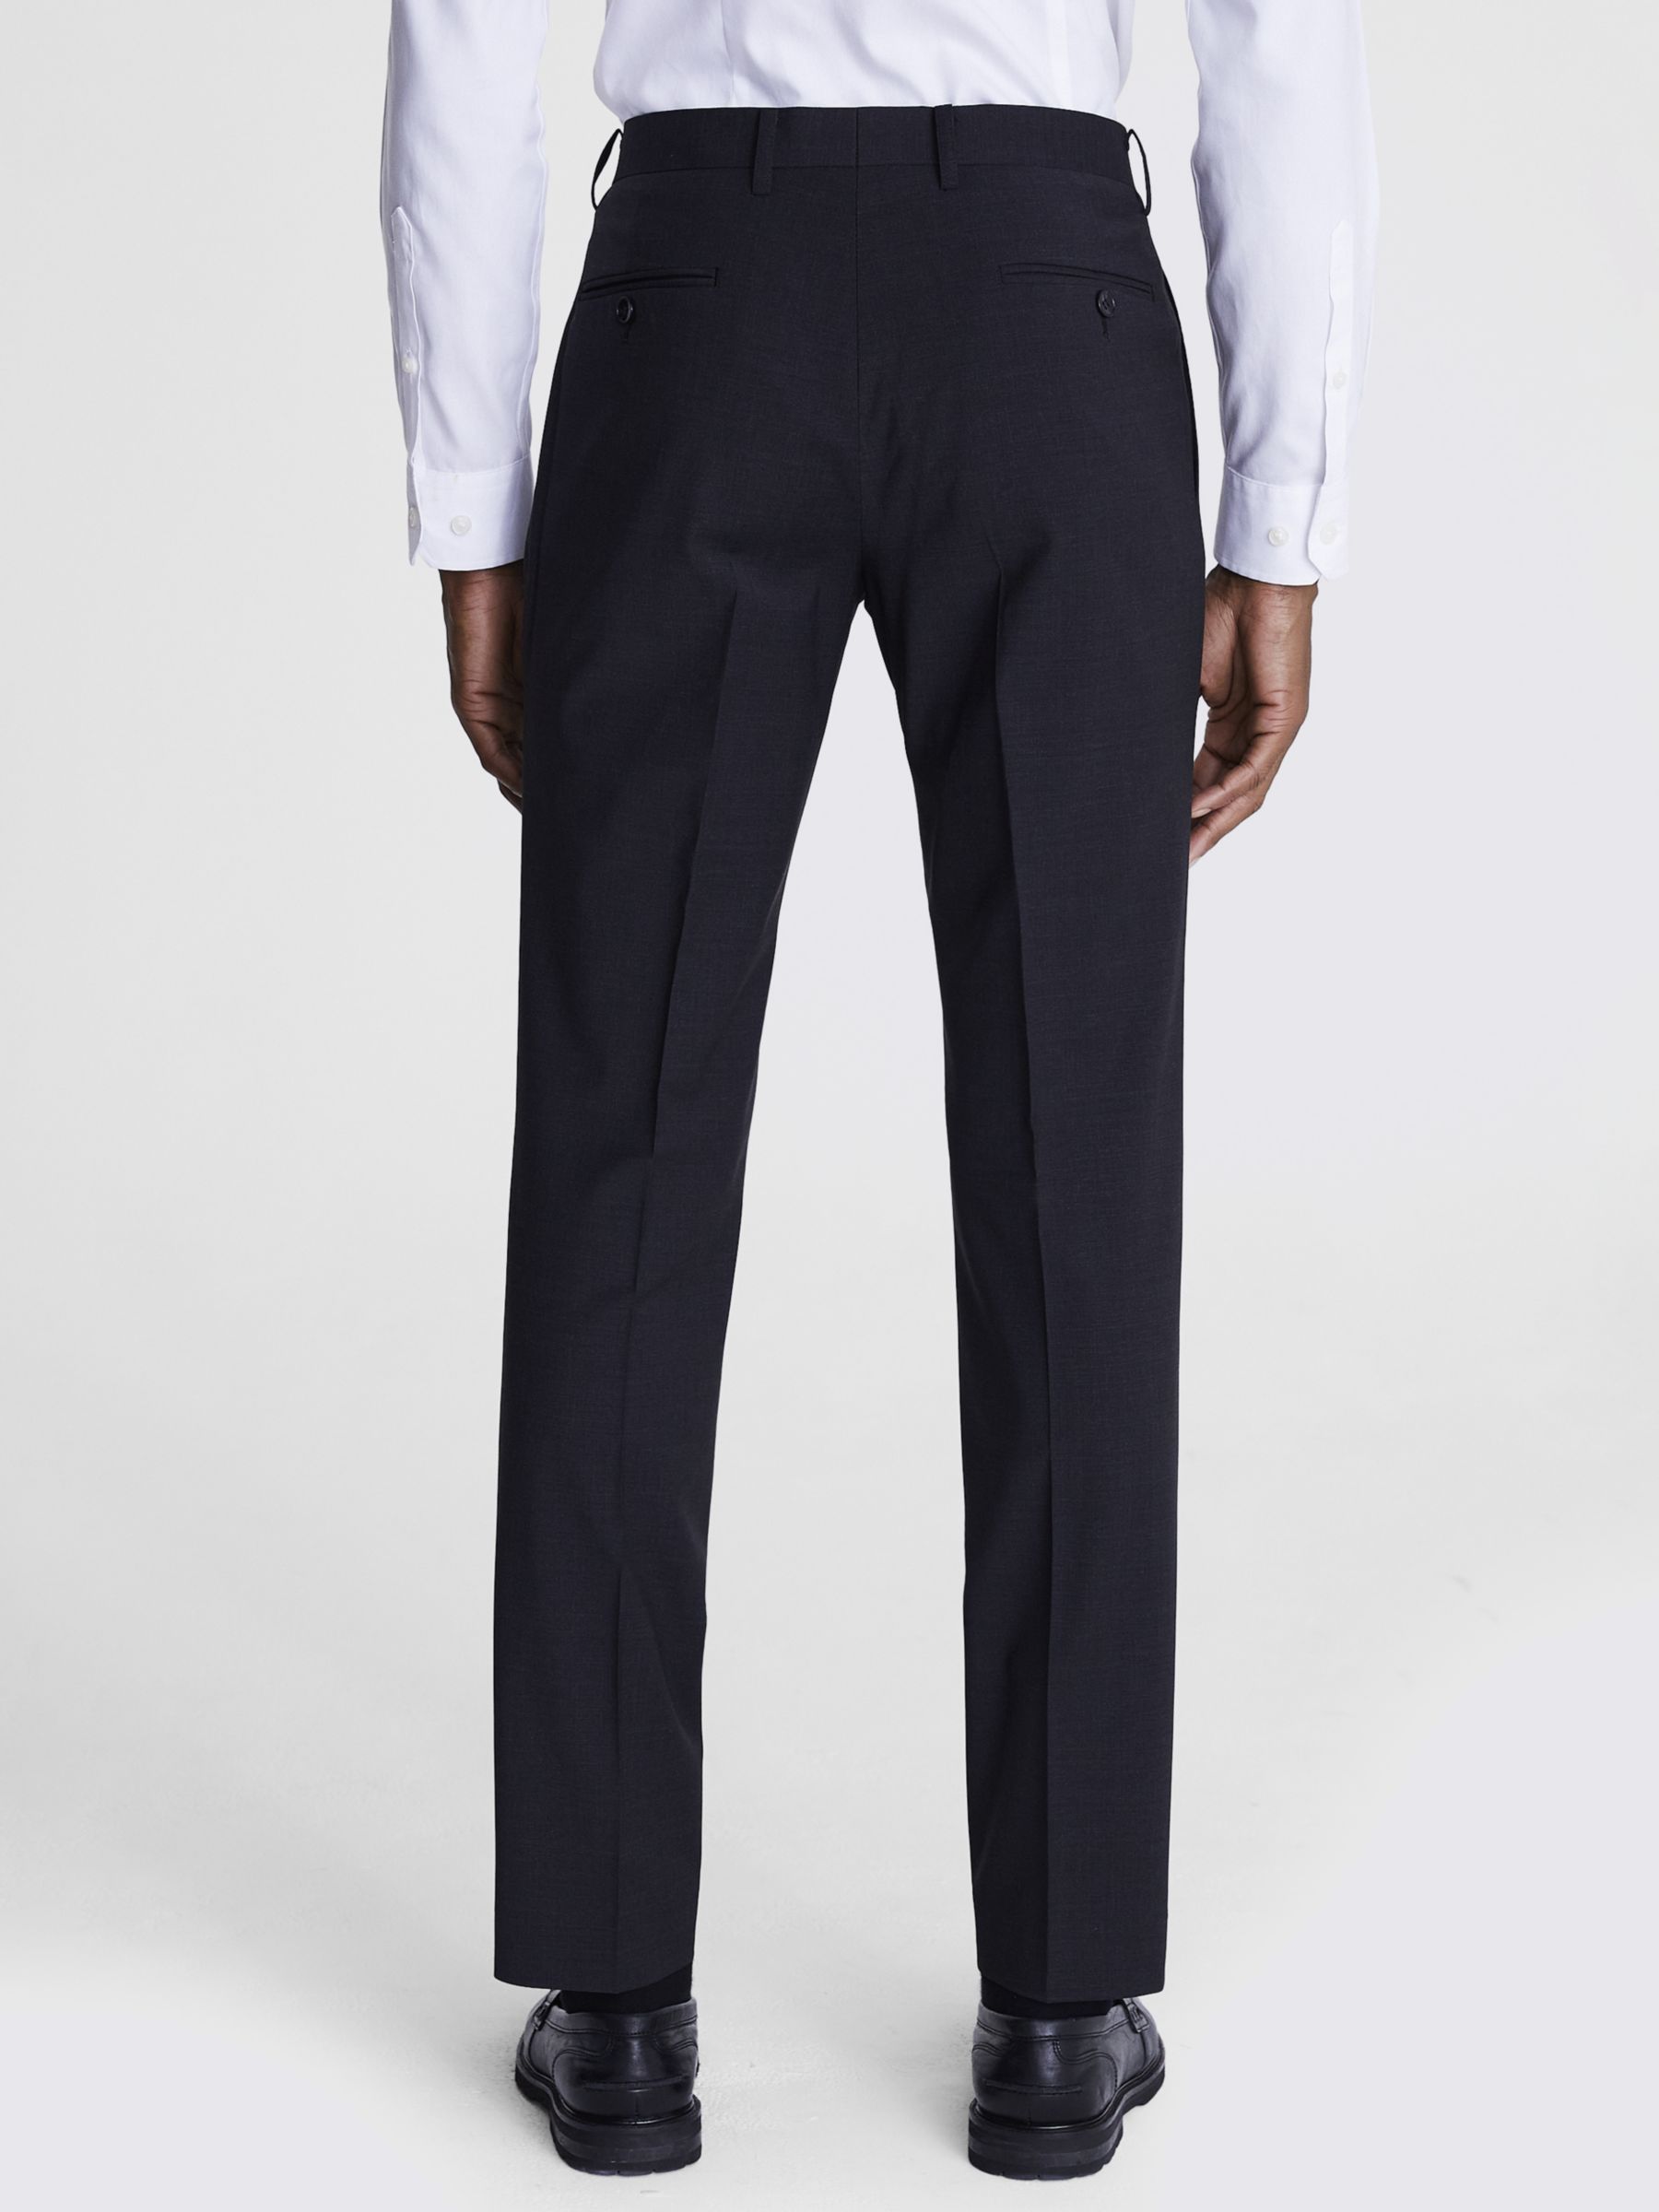 Moss Performance Tailored Suit Trousers at John Lewis & Partners